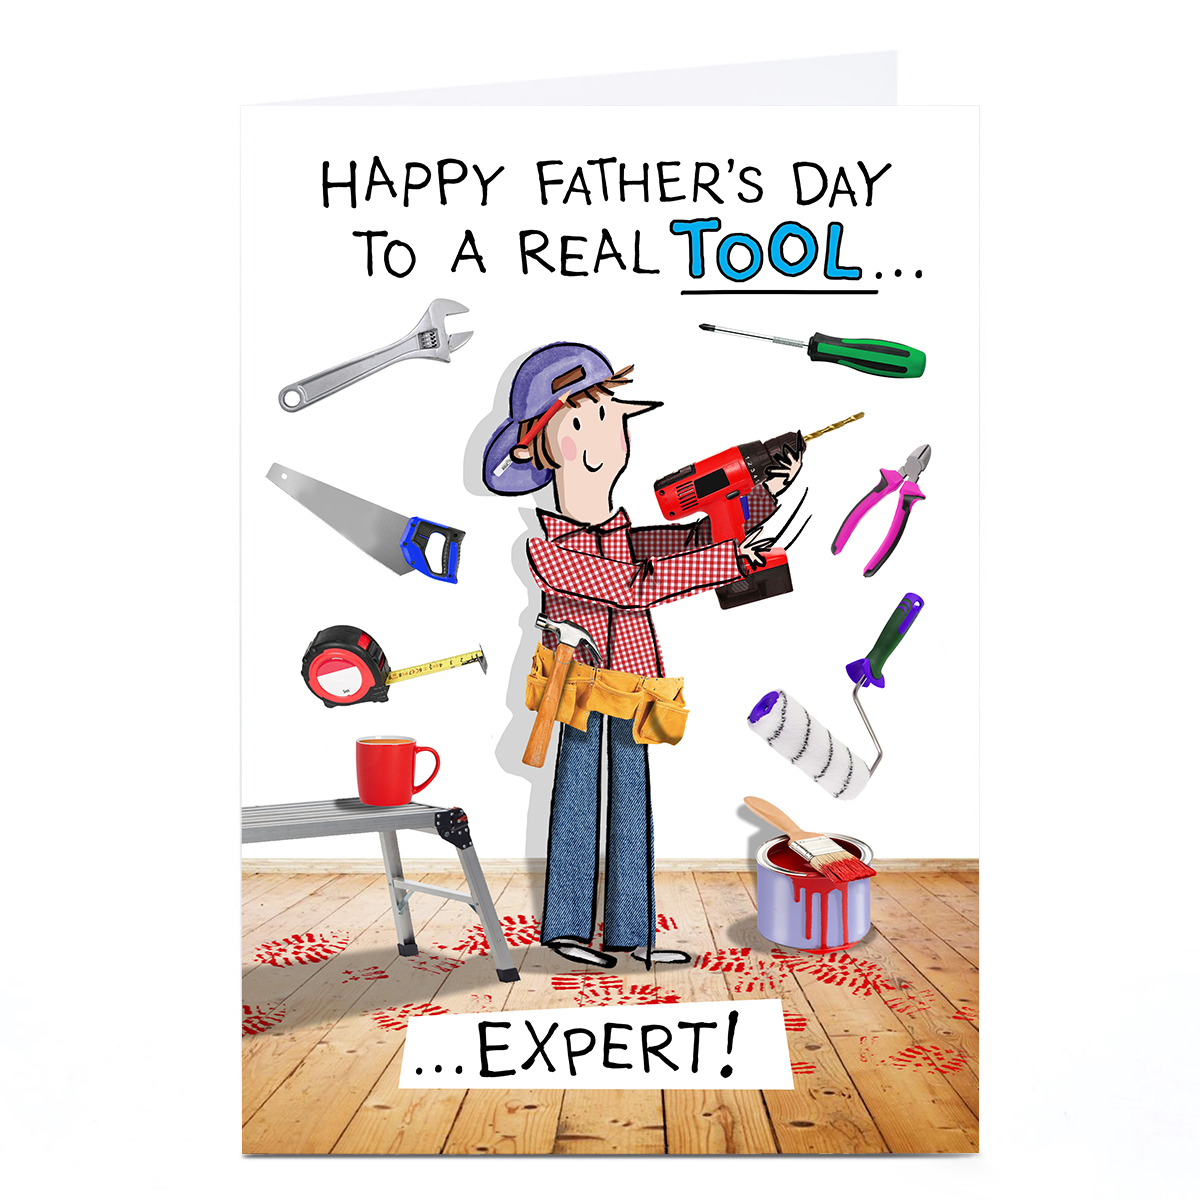 Personalised Emma Proctor Father's Day Card - Tool... Expert!